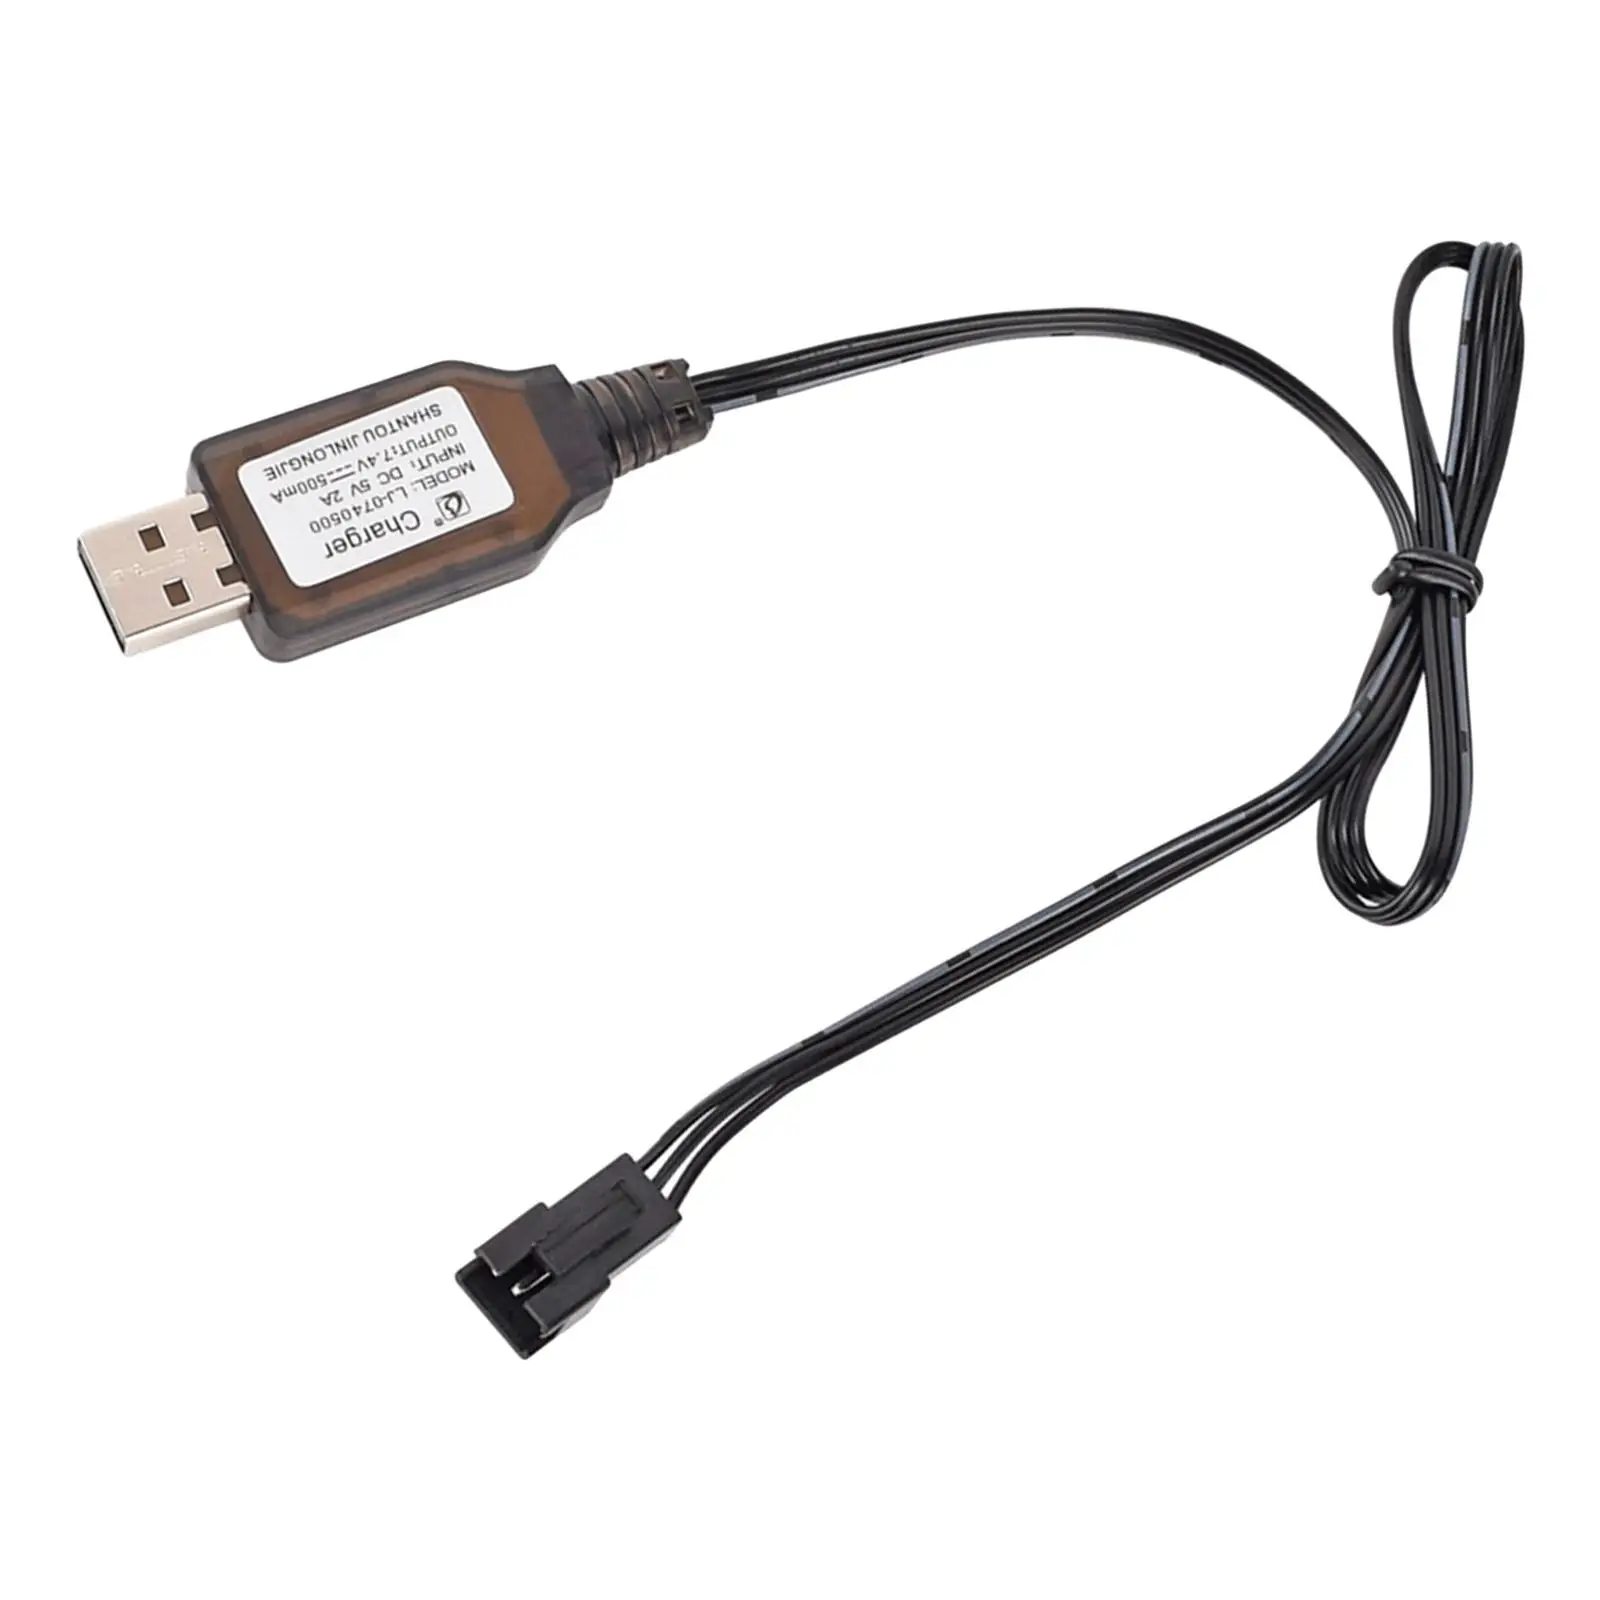 Battery USB Charger Cable 7.4V 3 Pin Universal 500MA with SM-3P Plug Connector for RC Car Remote Control Toys Tank Boat Buggy